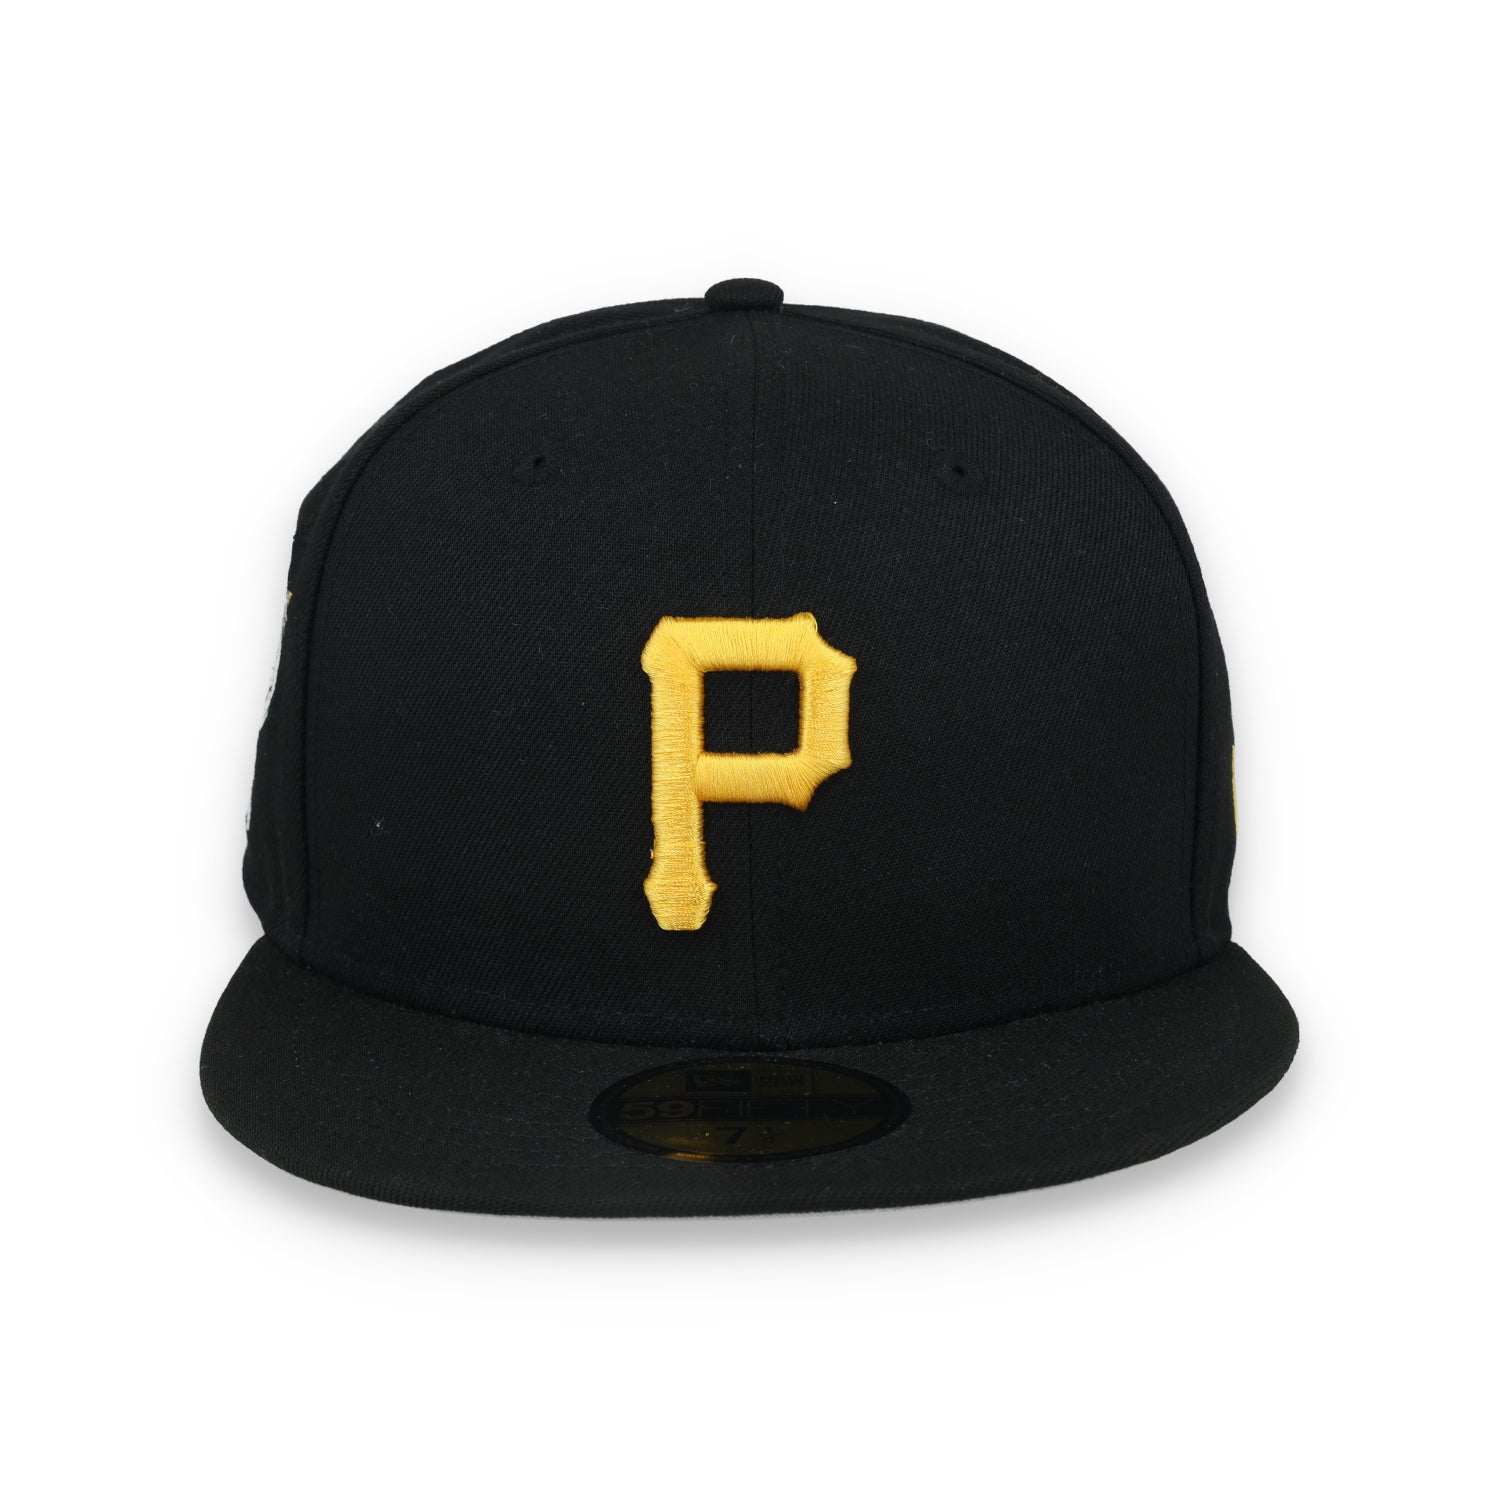 New Era Pittsburgh Pirates Throwback 59FIFTY Fitted Hat